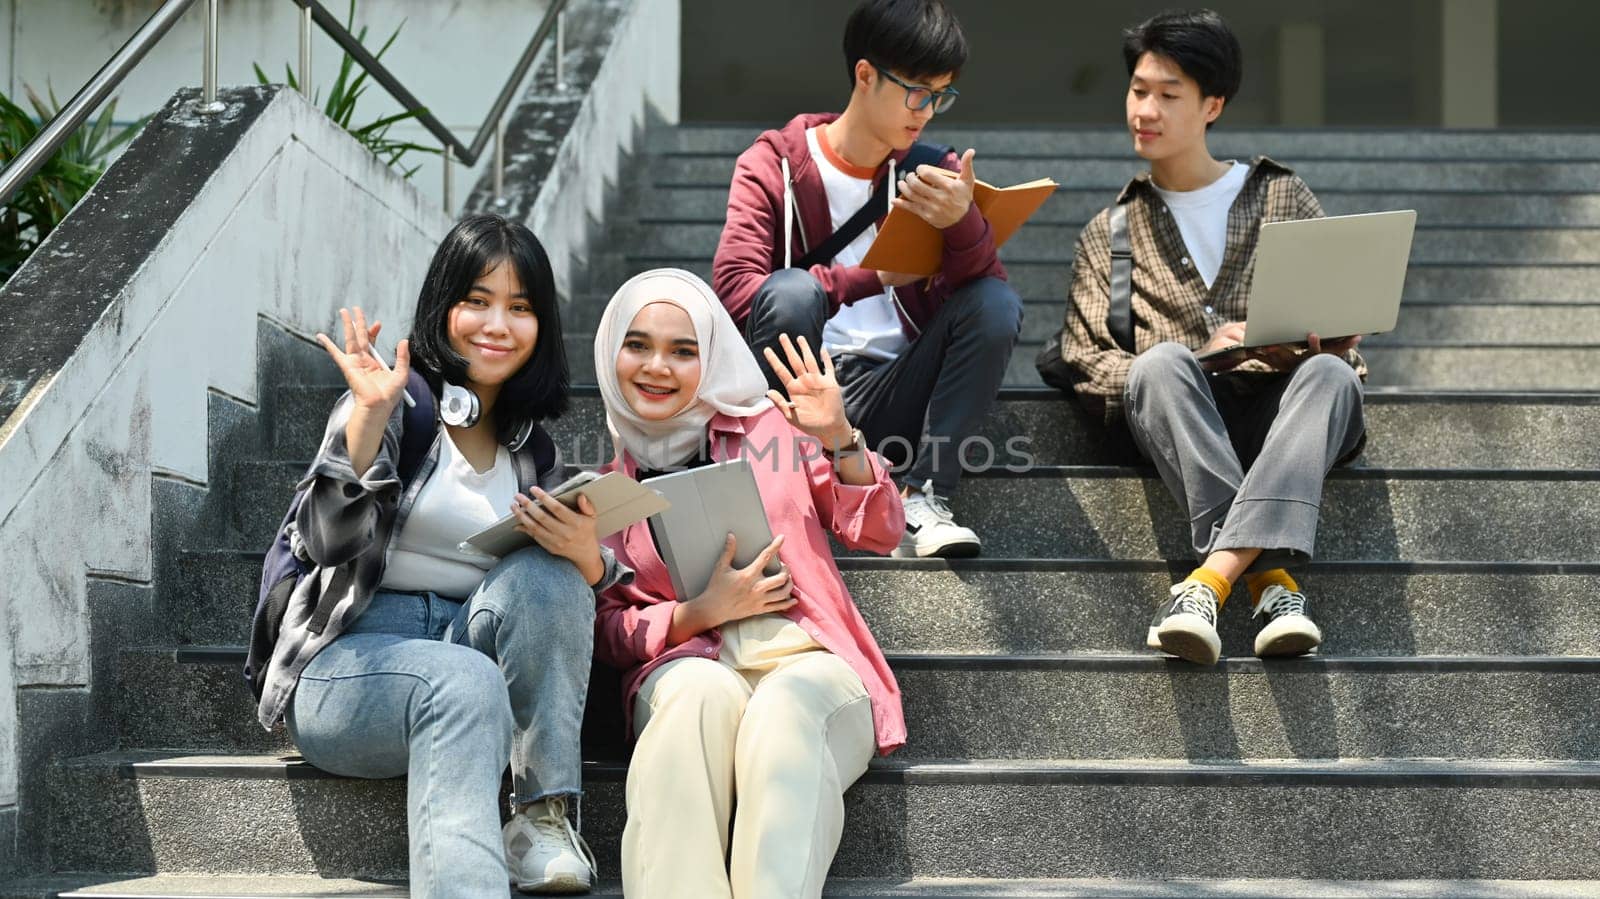 Group of cheerful college students spending time together on campus. Friendship and lifestyle concepts.